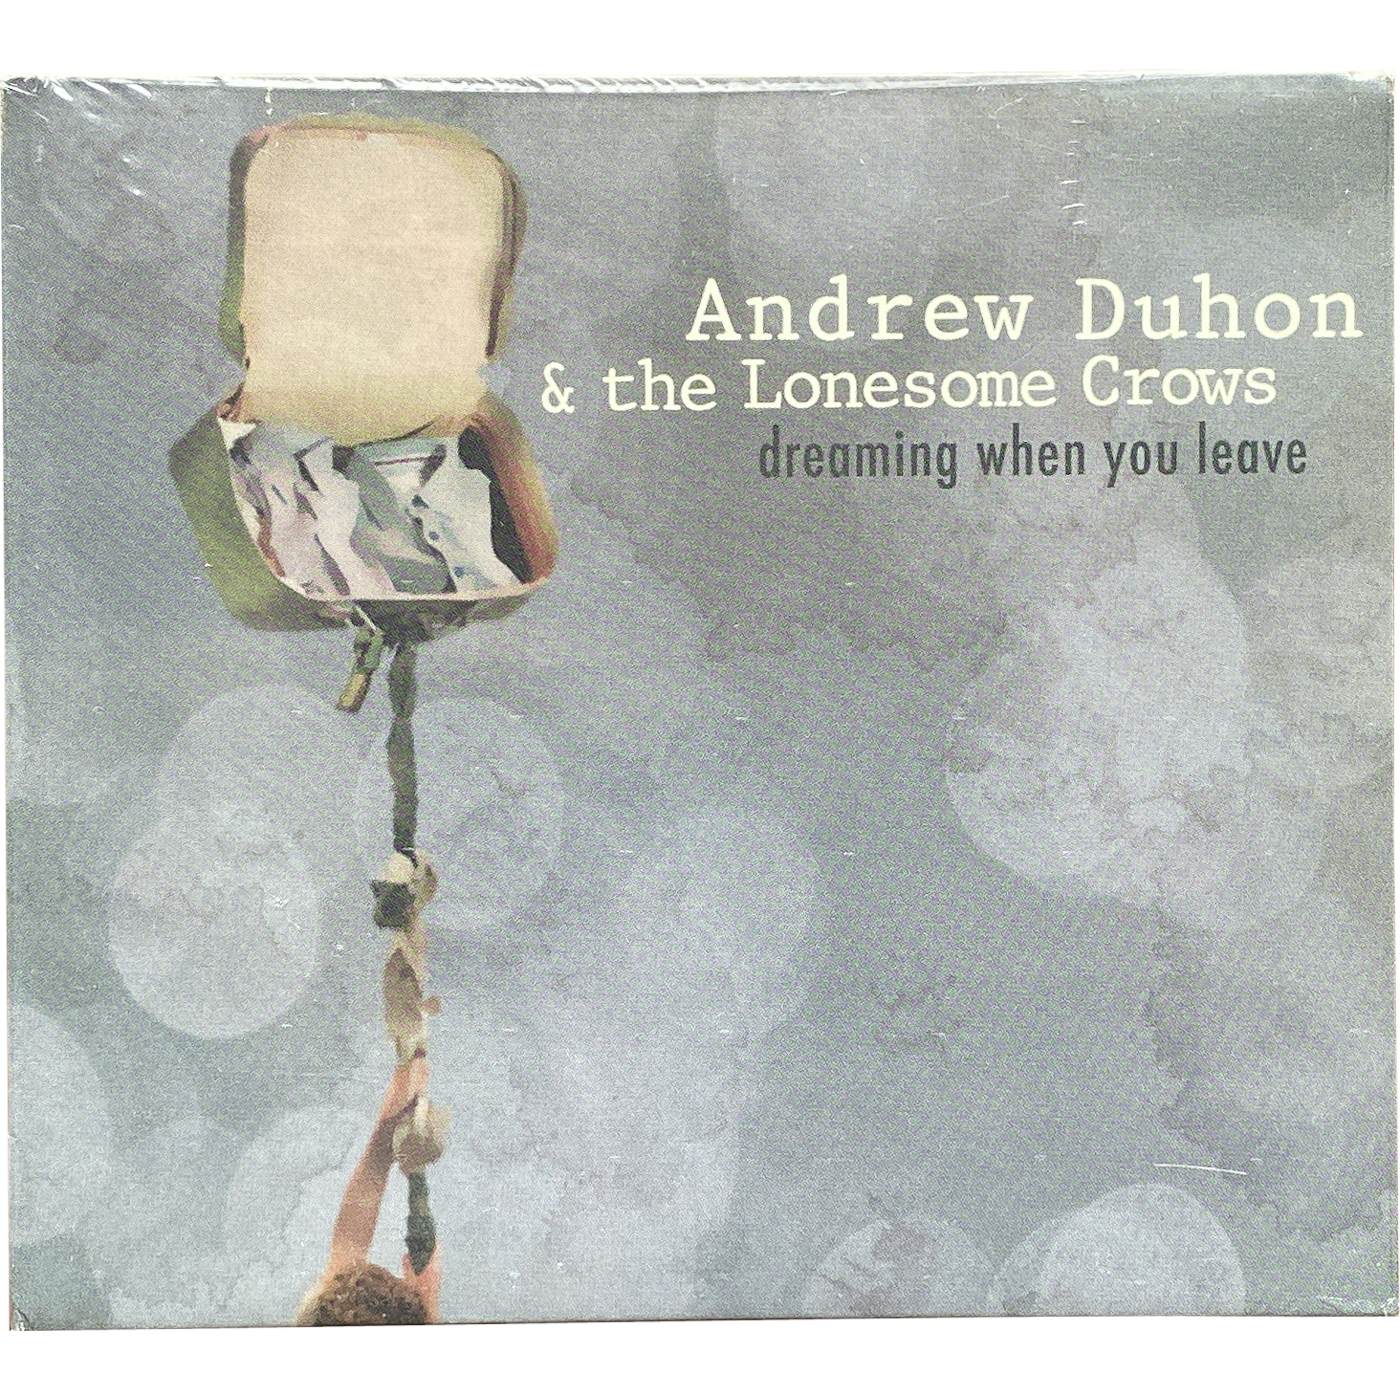 Andrew Duhon CD - Dreaming When You Leave